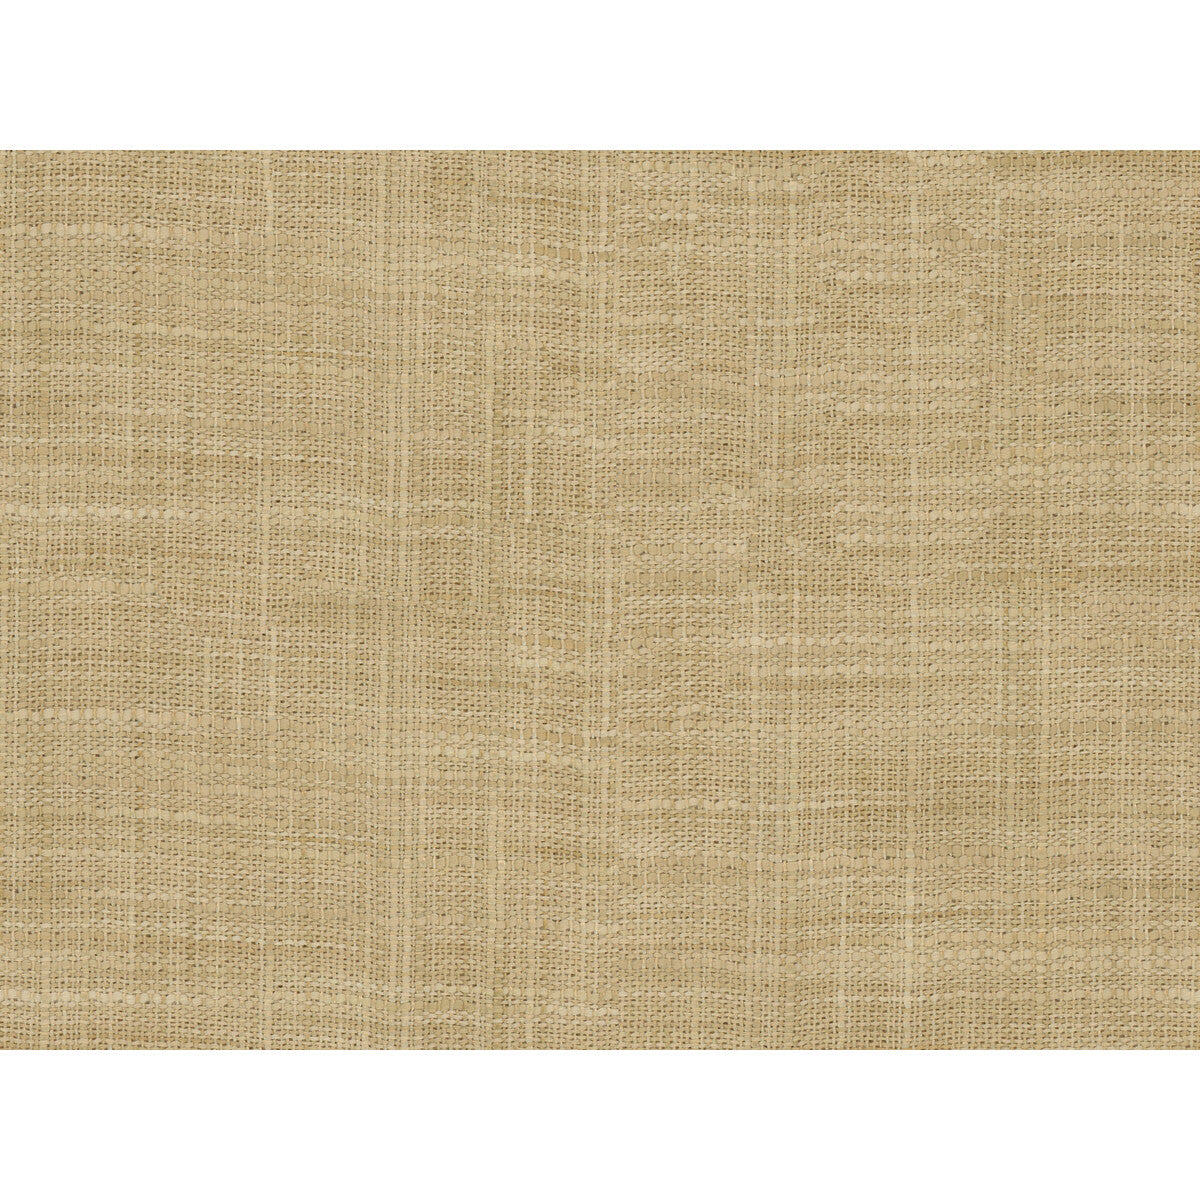 Pattu fabric in sesame color - pattern 9658.1116.0 - by Kravet Design in the Barclay Butera collection